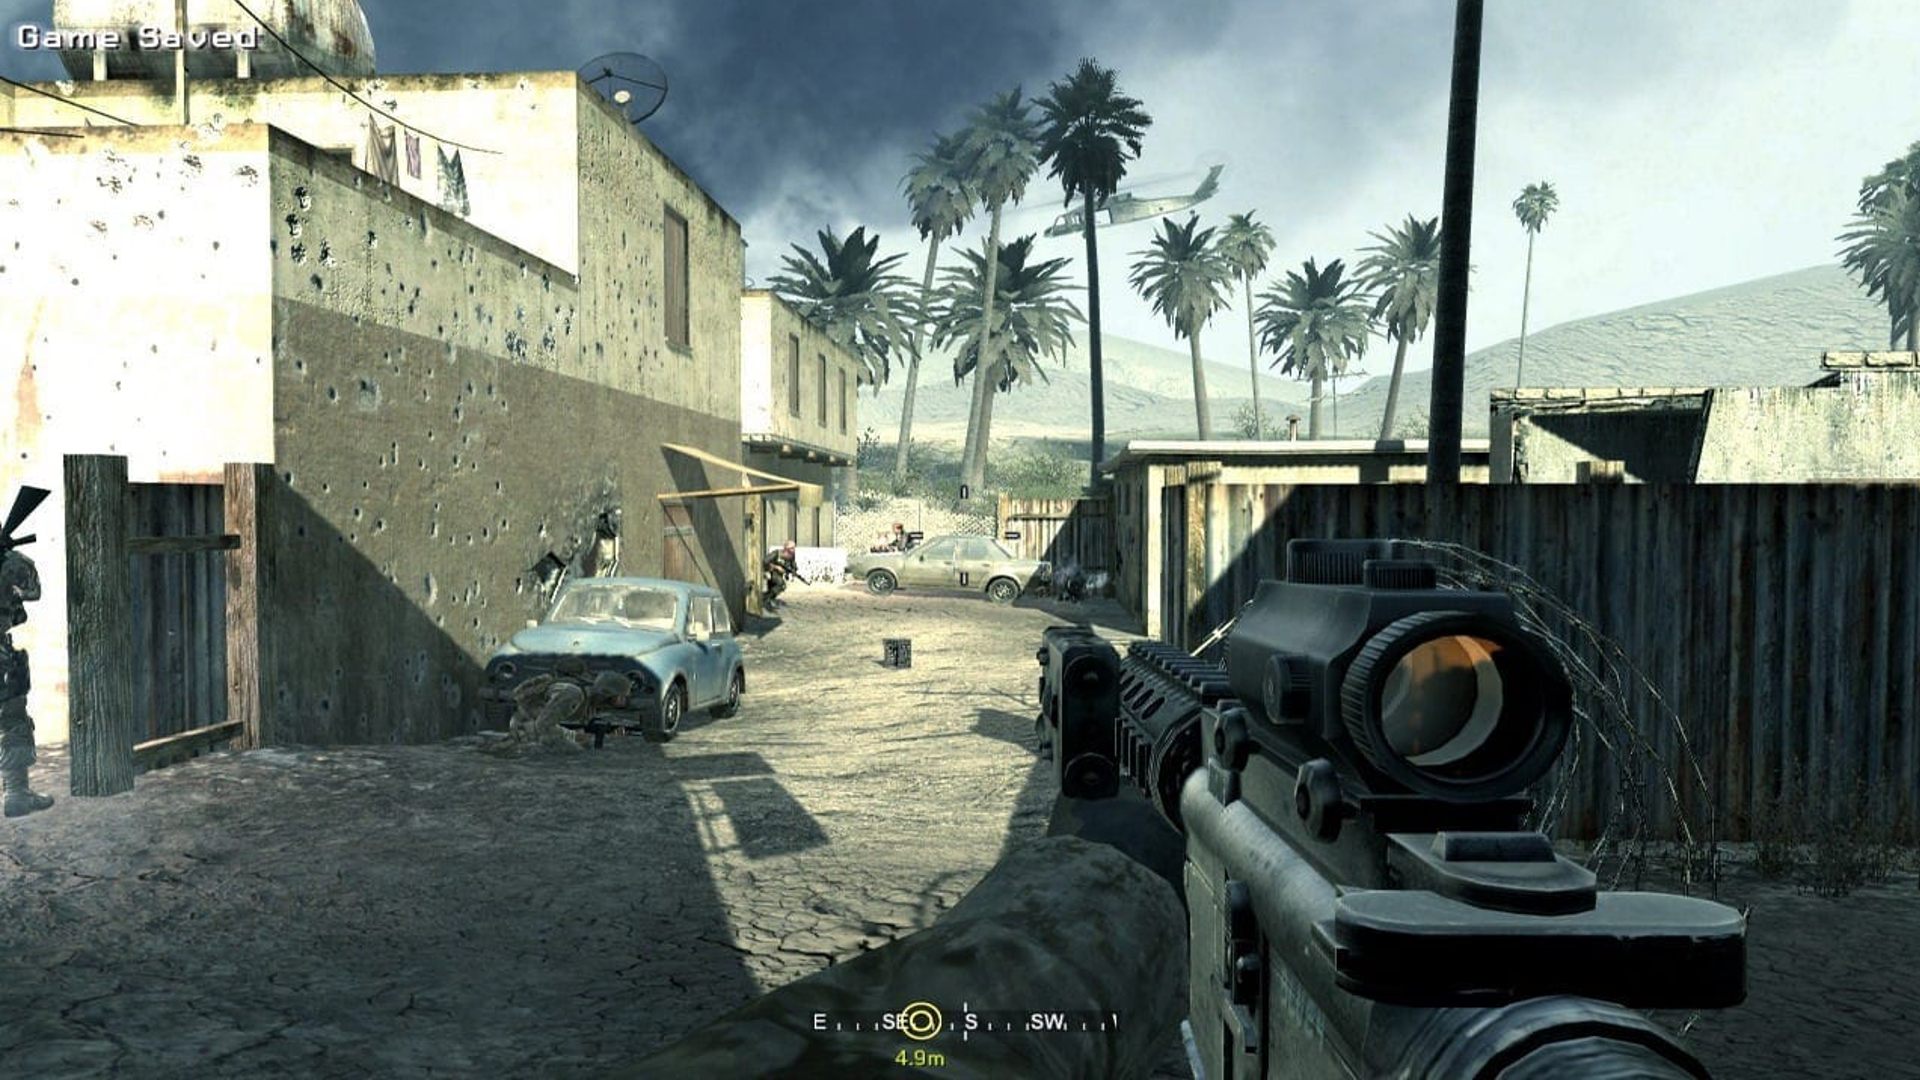 A player in Call of Duty's campaign can be seen aiming down a coridoor